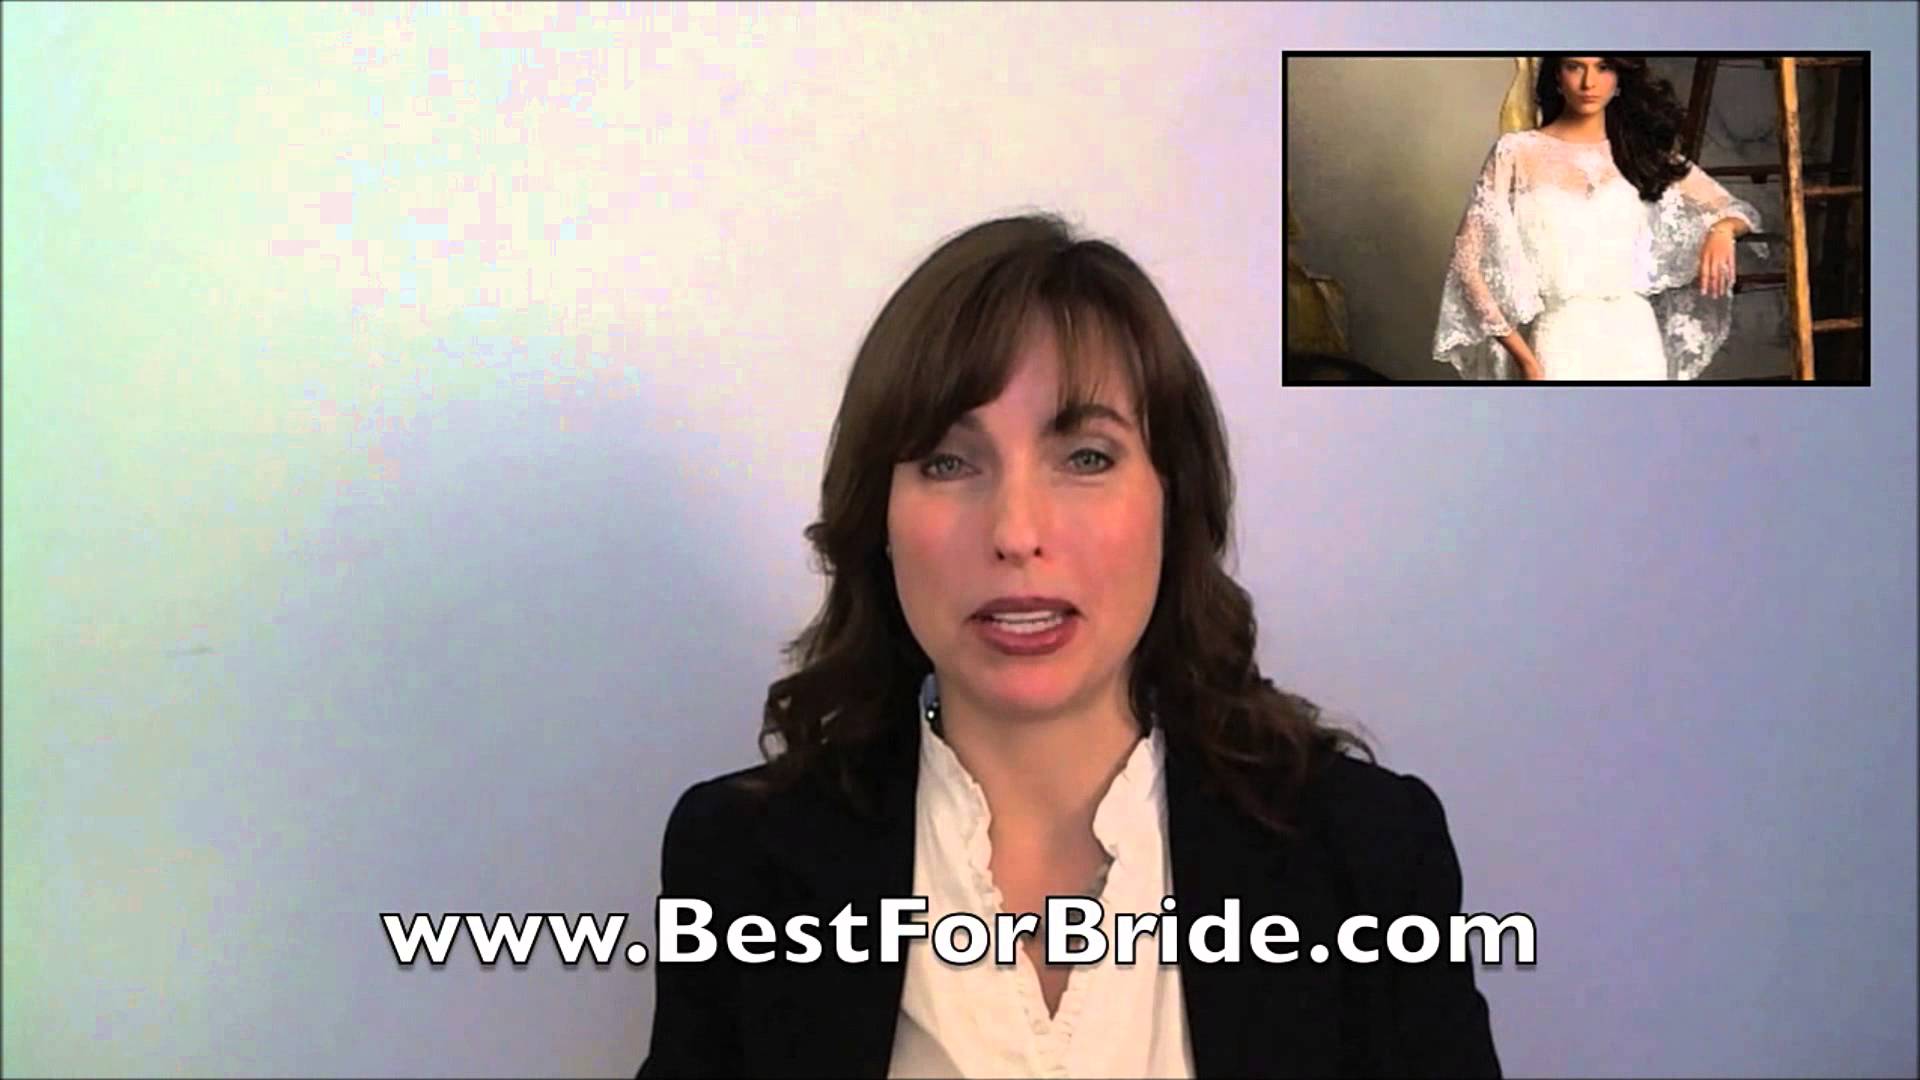 Wedding Expert Minute Tip 11 – How Formal Should Your Wedding Dress Be?